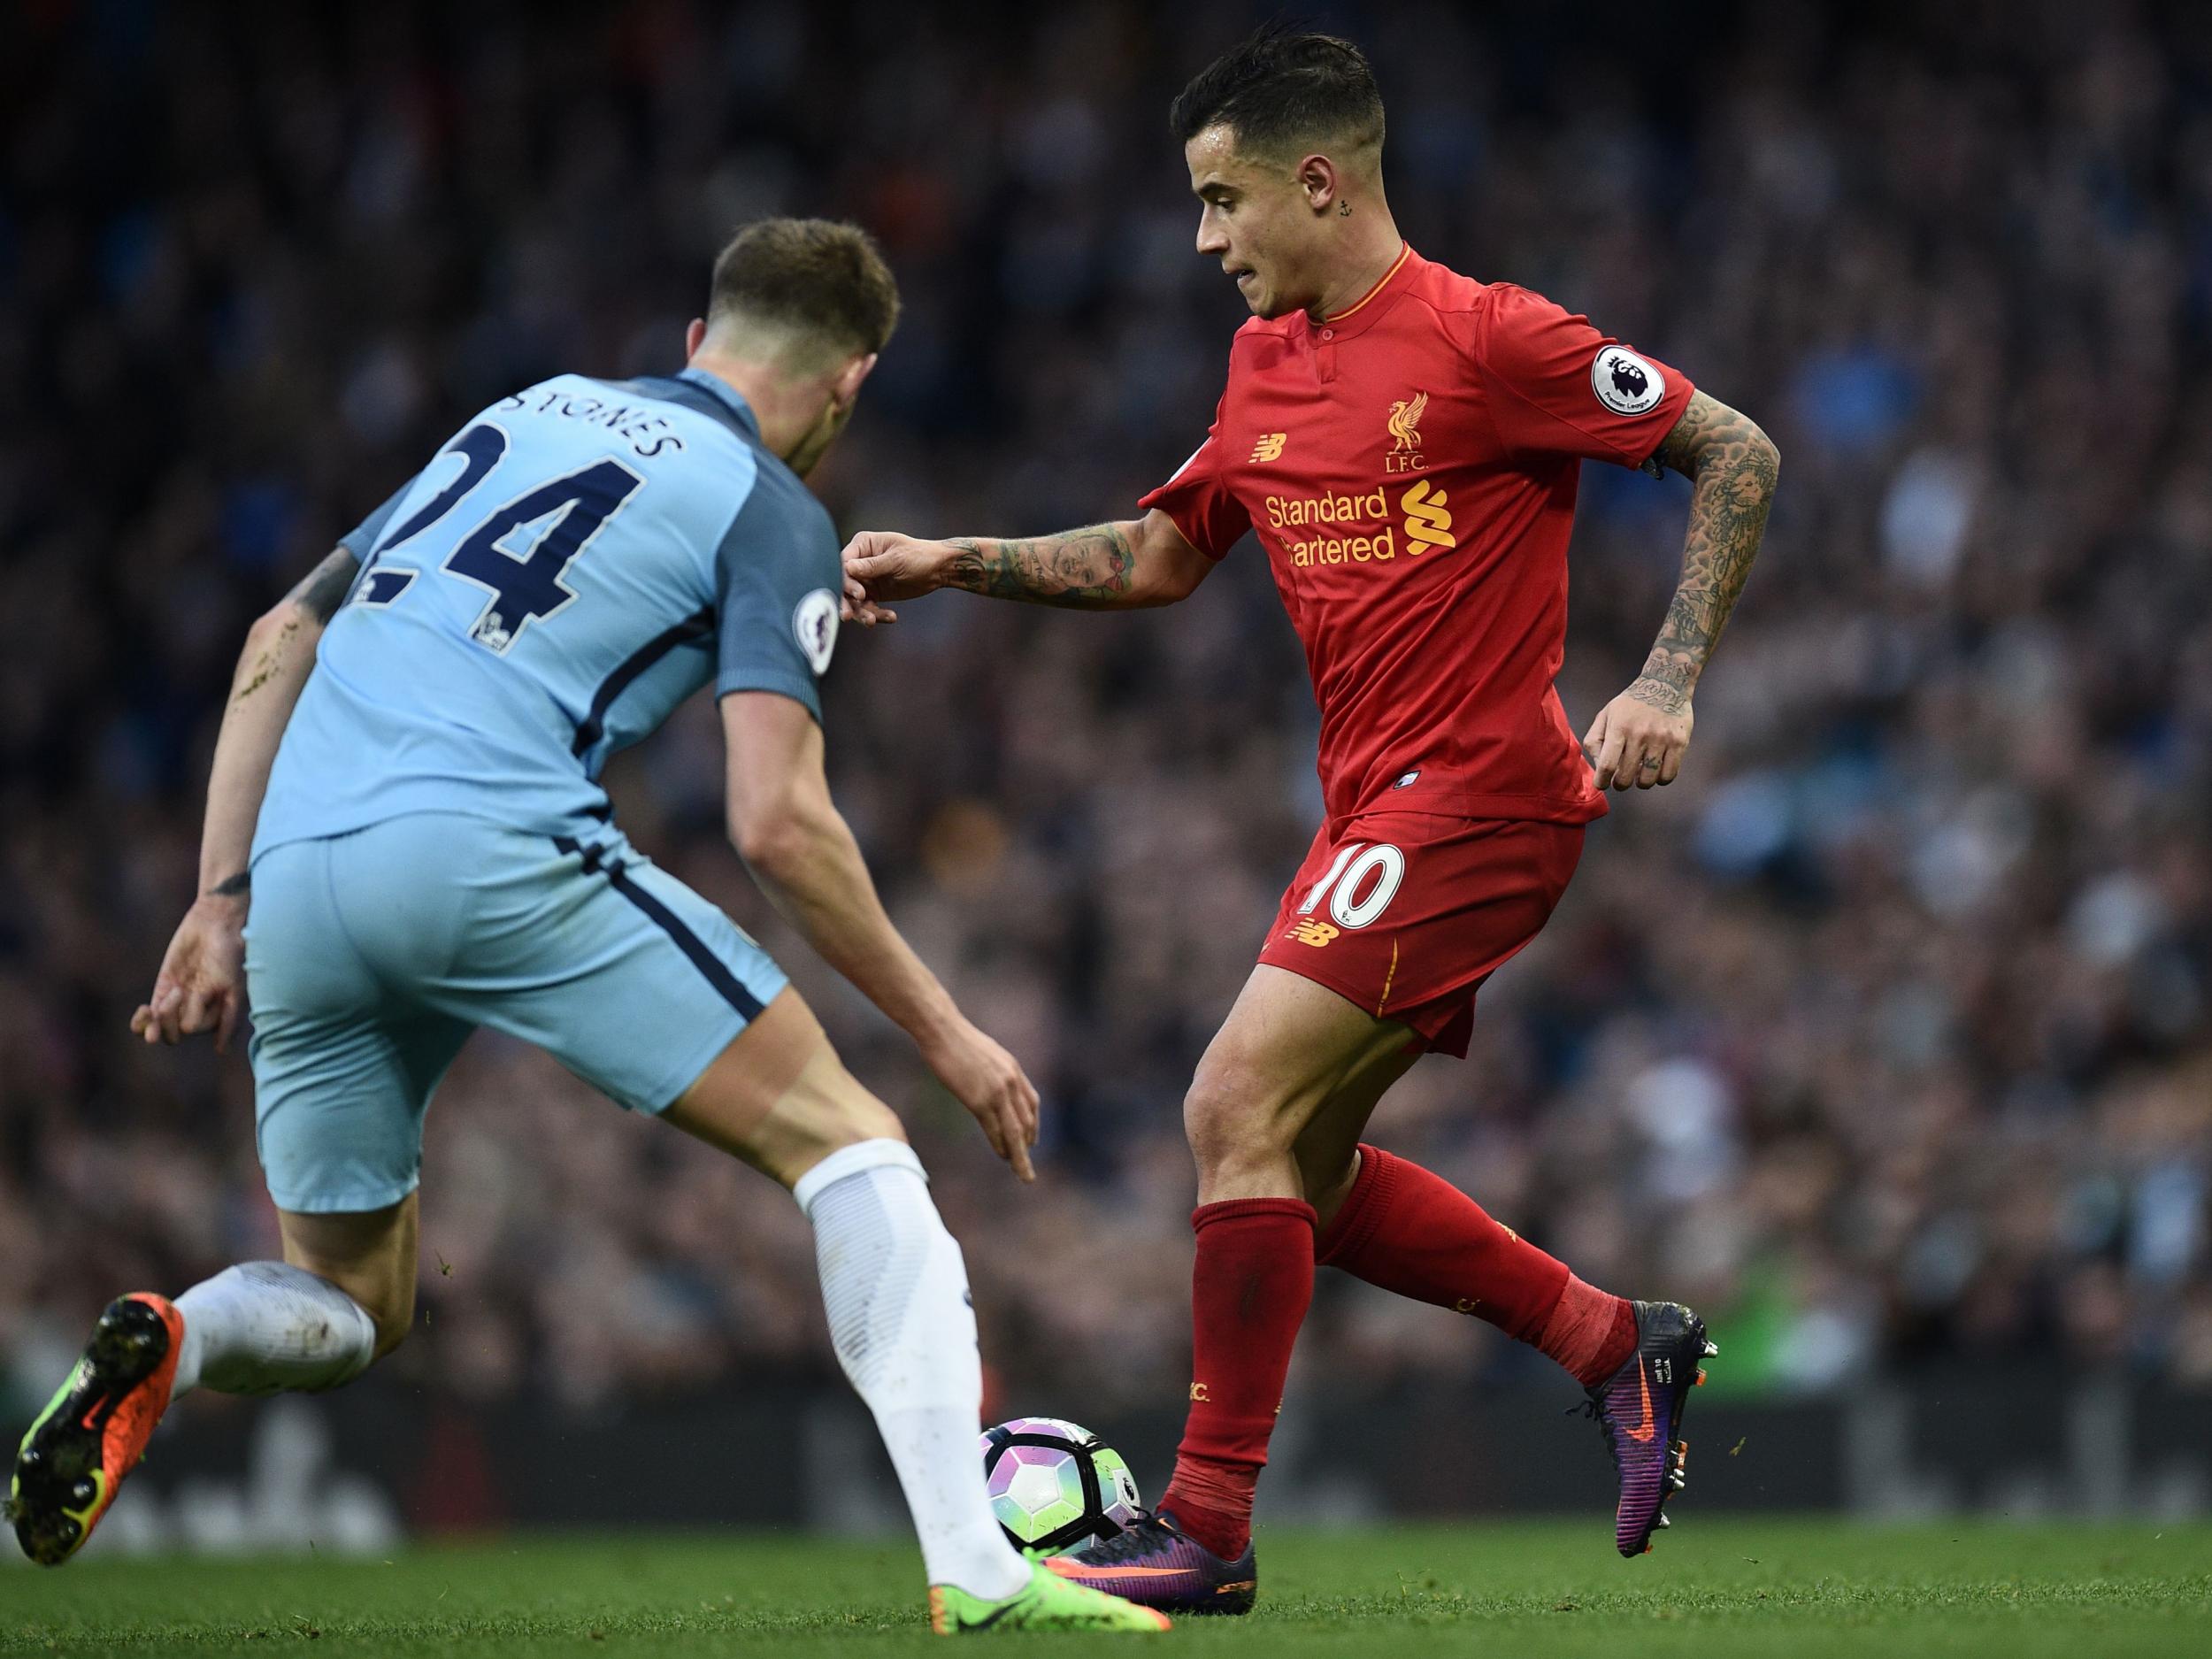 Coutinho struggled for Liverpool while Stones was vastly improved